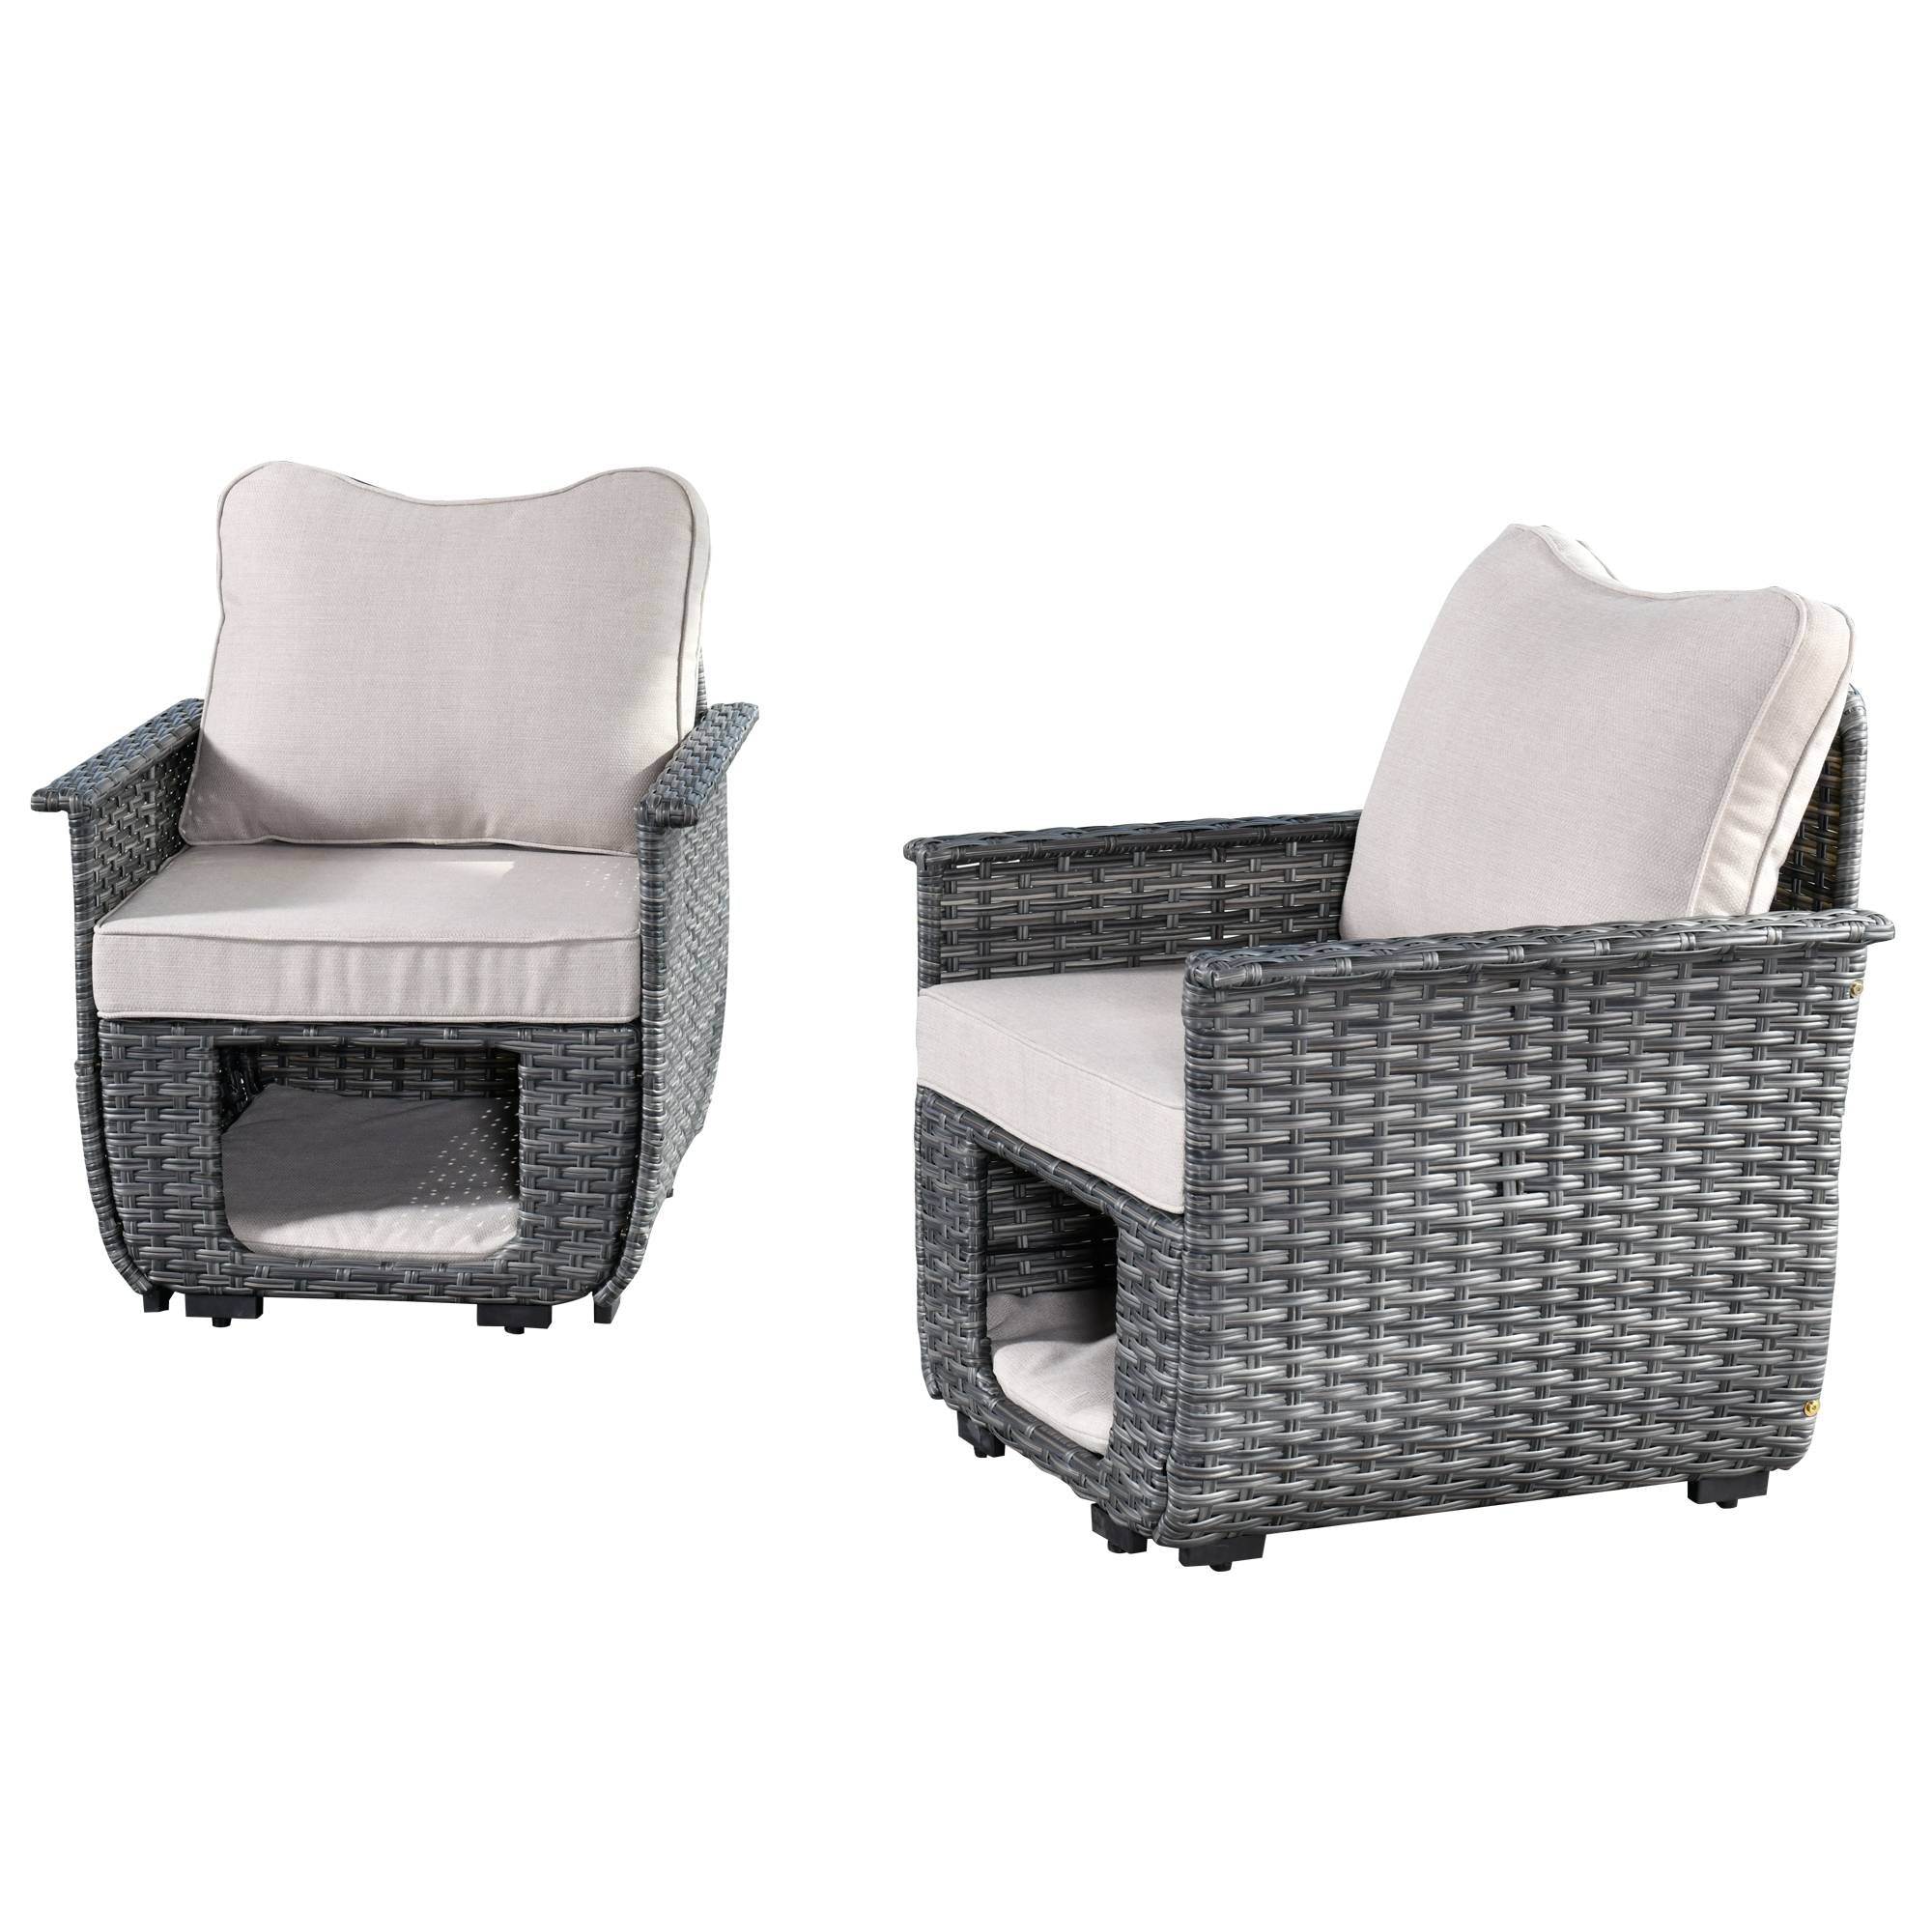 Ovios Patio Chairs *2 Pieces ,Multifunctional Storage,Pet Serie